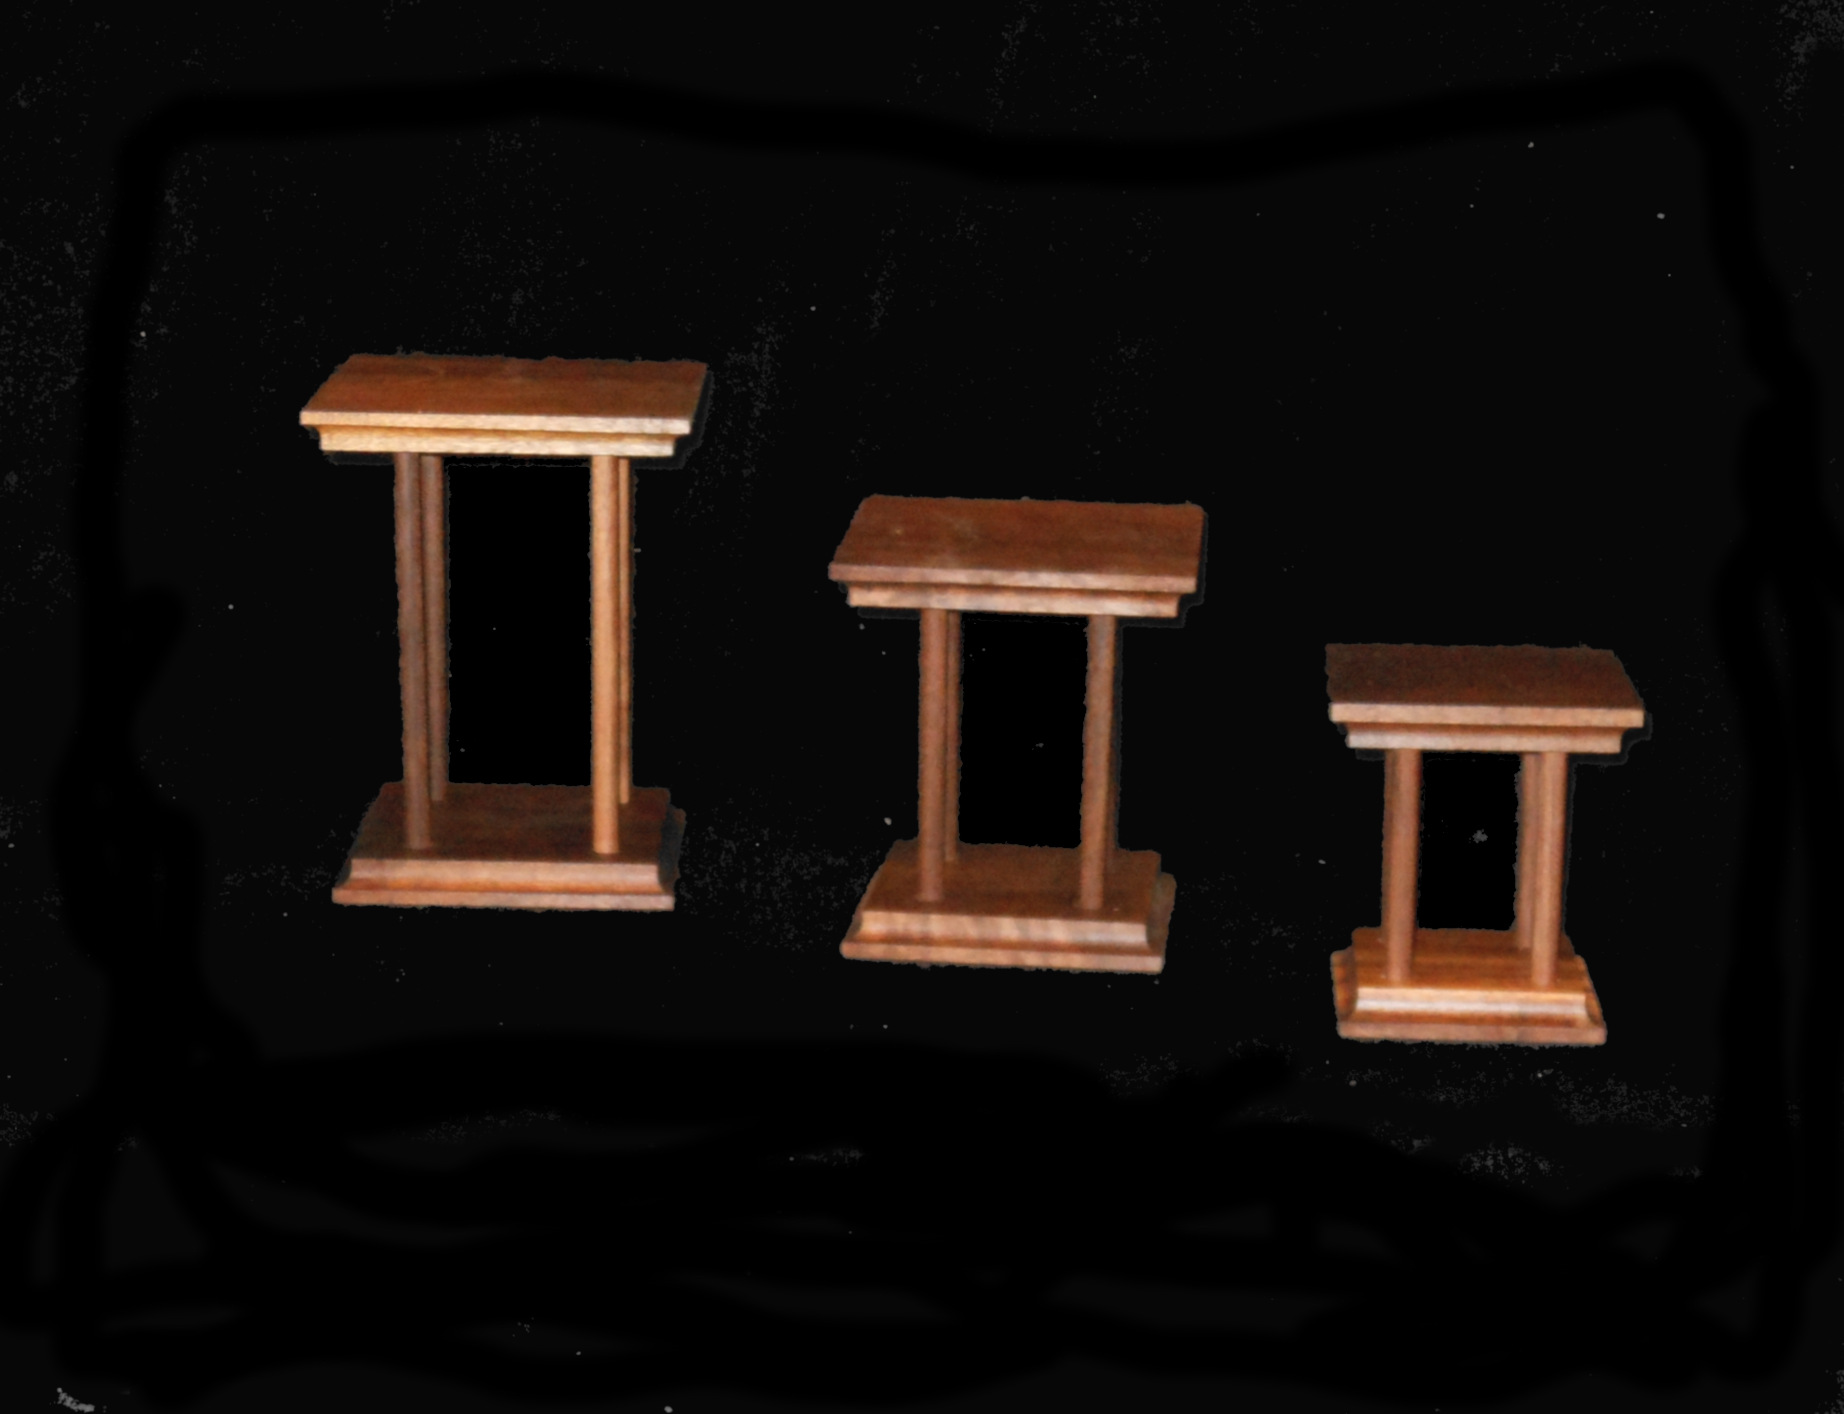 Individual Brazilian Walnut Stands at $35 each